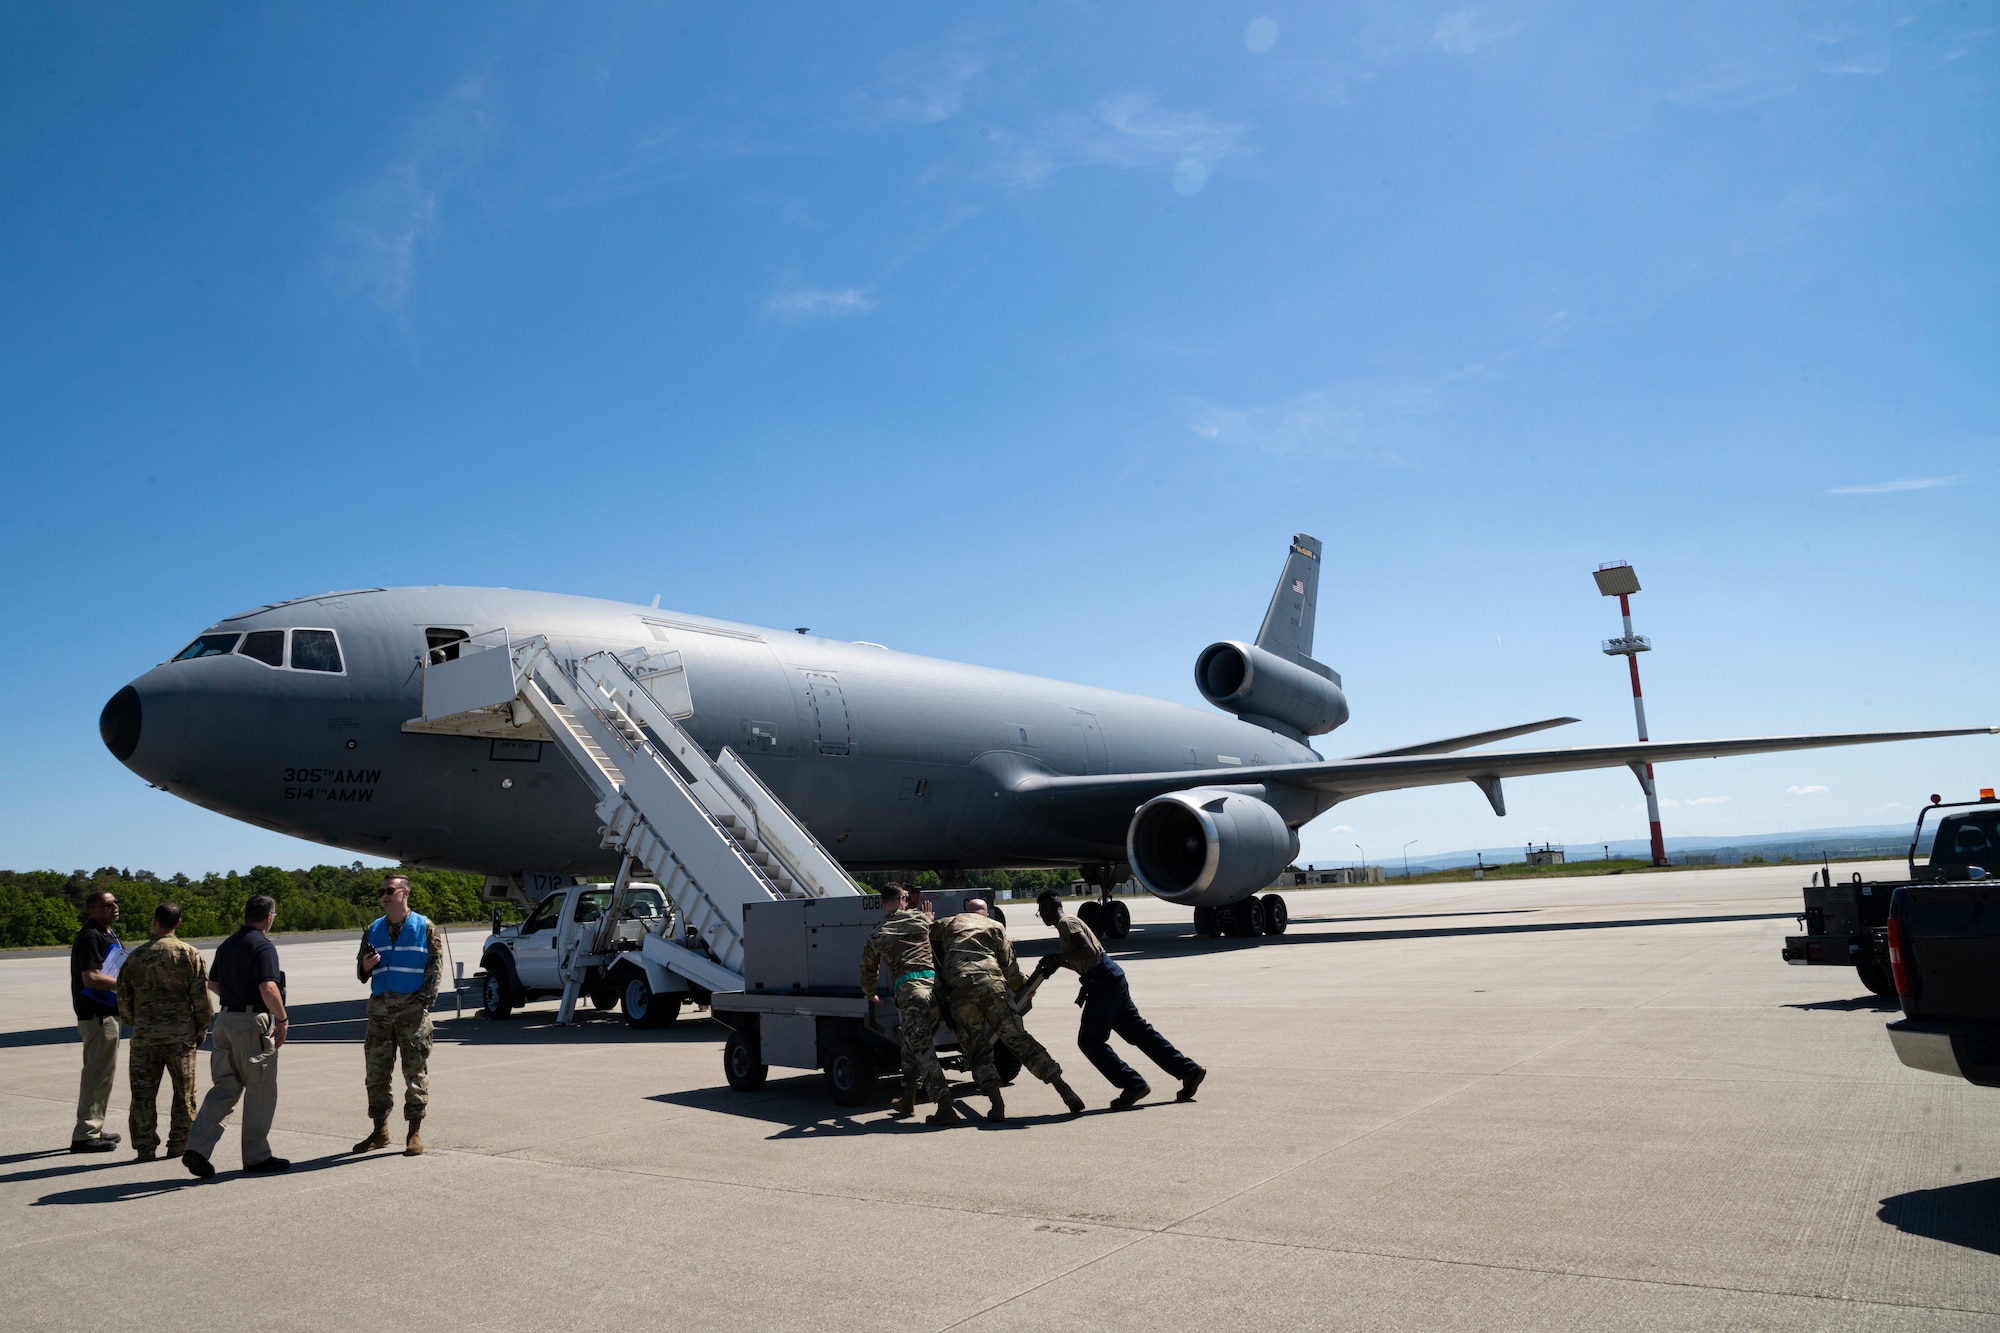 Airmen from the 726th Air Mobility Squadron at Spangdahlem Air Base, Germany, prepare to offload passengers from A KC-10 Extender aircraft that arrived from the 305th Air Mobility Wing at Joint Base McGuire-Dix-Lakehurst, New Jersey, May 14, 2022. The 305th AMW generates, mobilizes and deploys C-17 Globemaster III and KC-10 Extender aircraft and are currently supporting operations within the European theater. (U.S. Air Force photo by Senior Airman Ali Stewart)